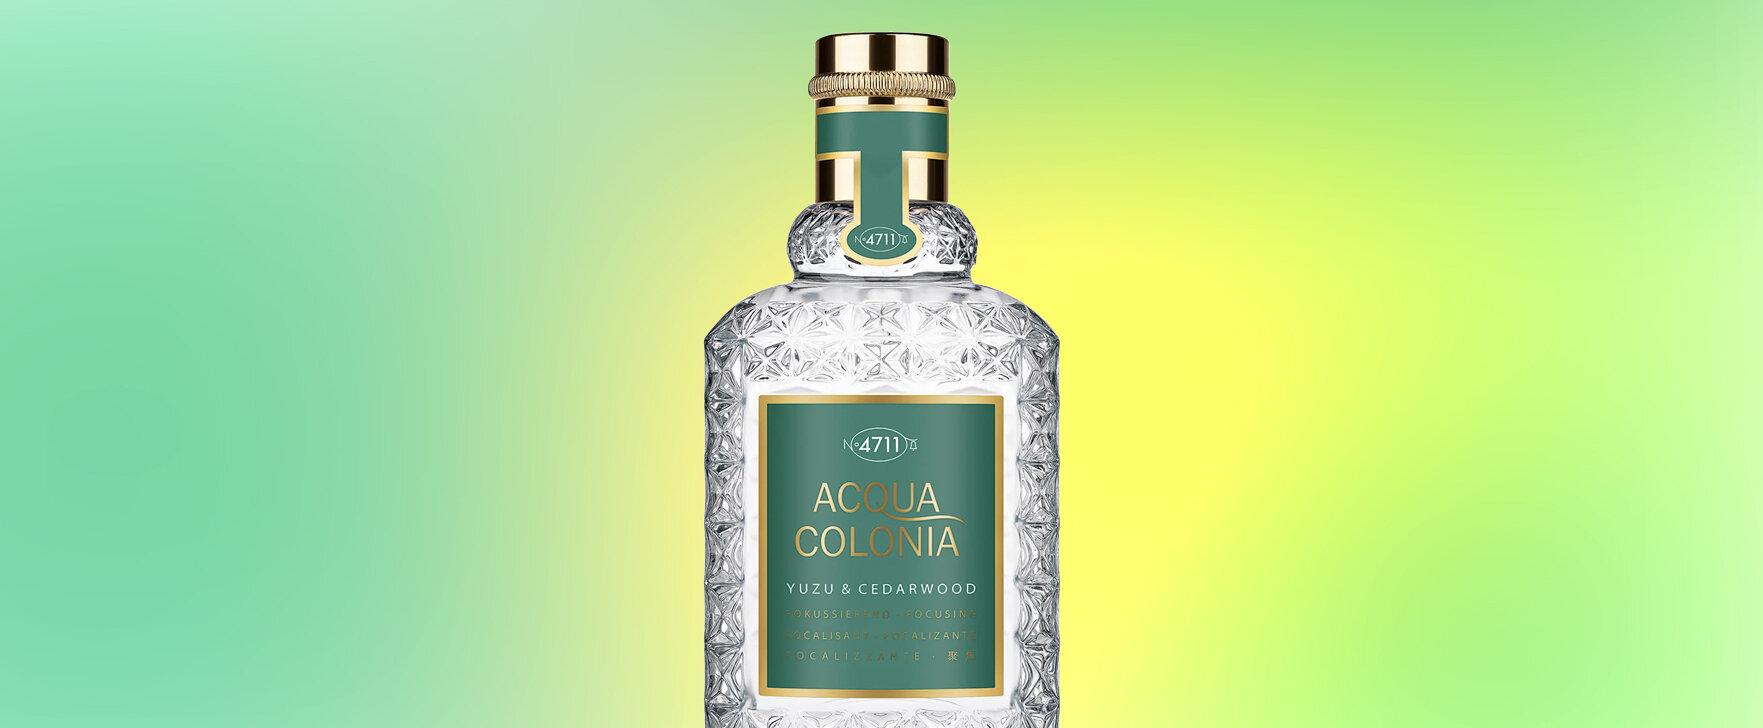 For Focus and Clarity: The New "Yuzu & Cedarwood" Eau de Cologne From 4711